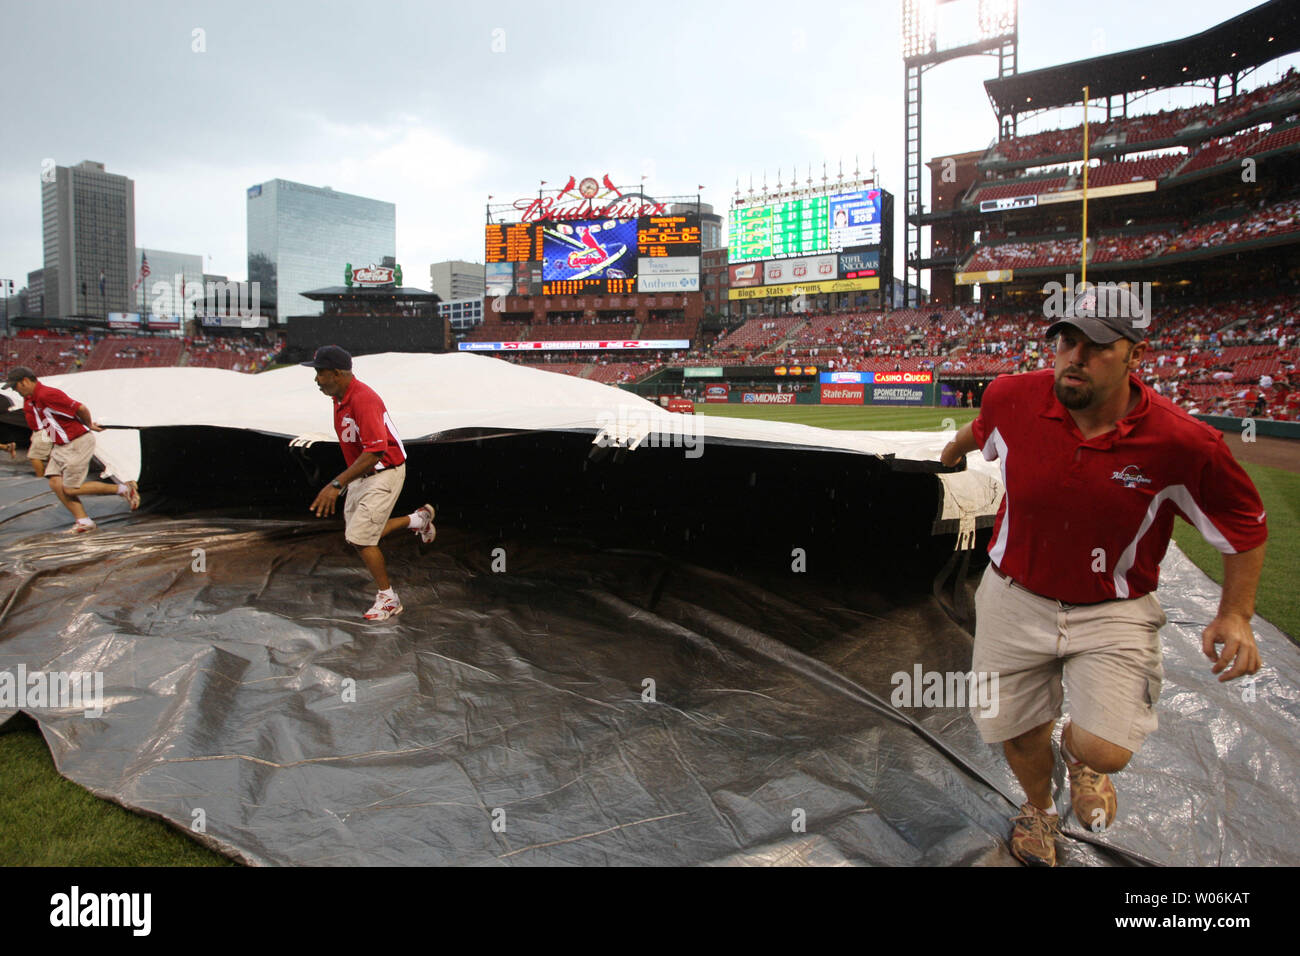 Busch Stadium field crew members run to spread the tarp across the infield as rain falls during the sixth inning of the San Diego Padres-St. Louis Cardinals baseball game at Busch Stadium in St. Louis on August 16, 2009.   UPI/Bill Greenblatt Stock Photo